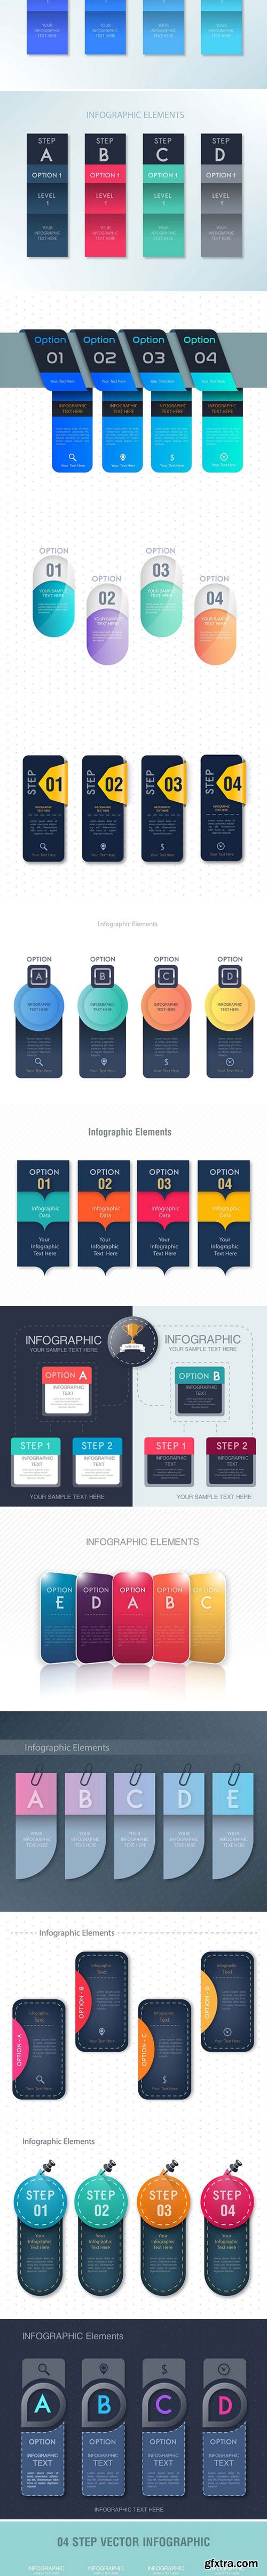 CM - Infographic Template Collection - AI 2184985